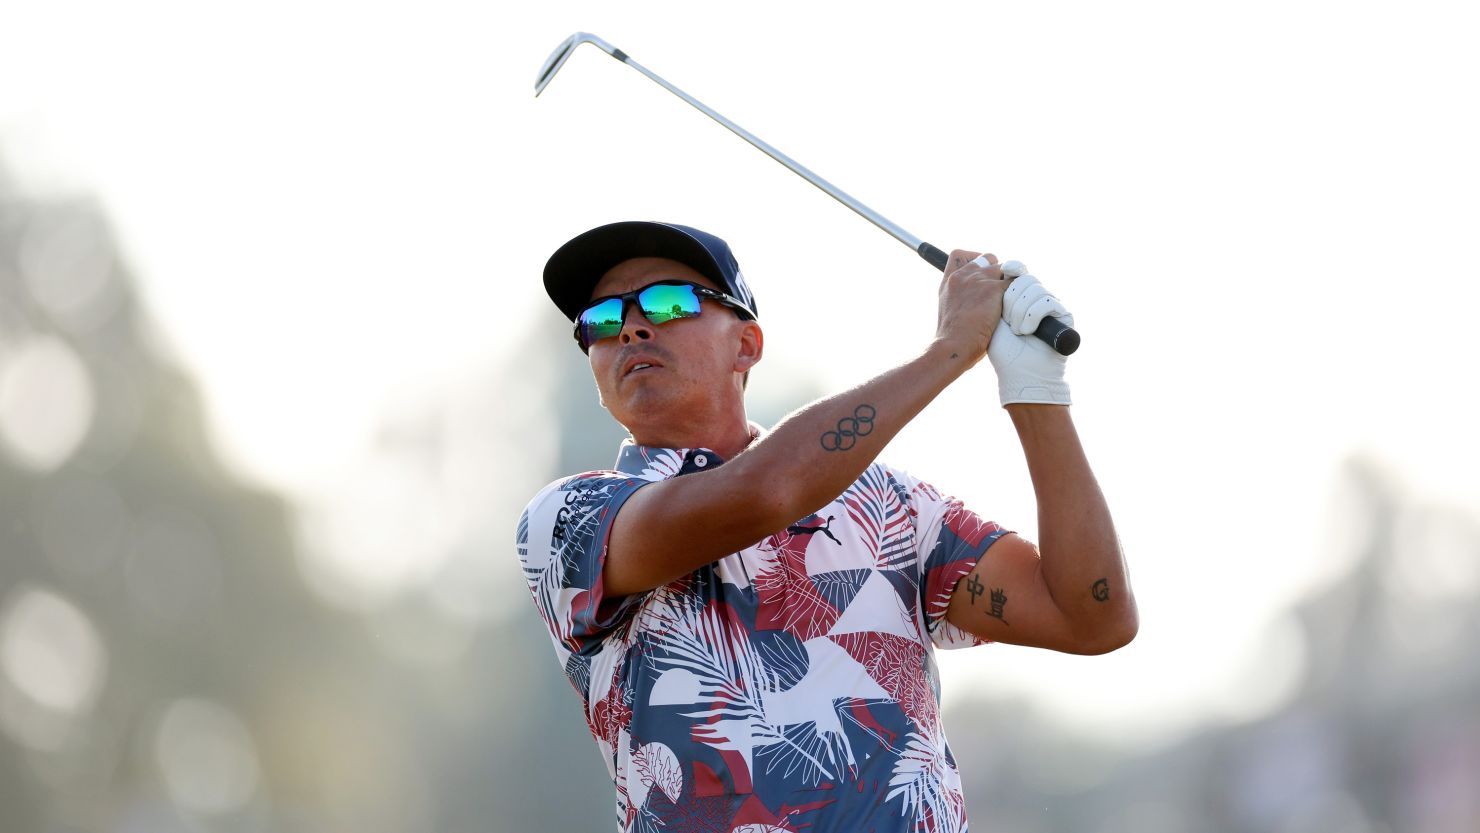 Rickie Fowler in action during the second round of the 123rd U.S. Open Championship at Los Angeles Country Club, California.